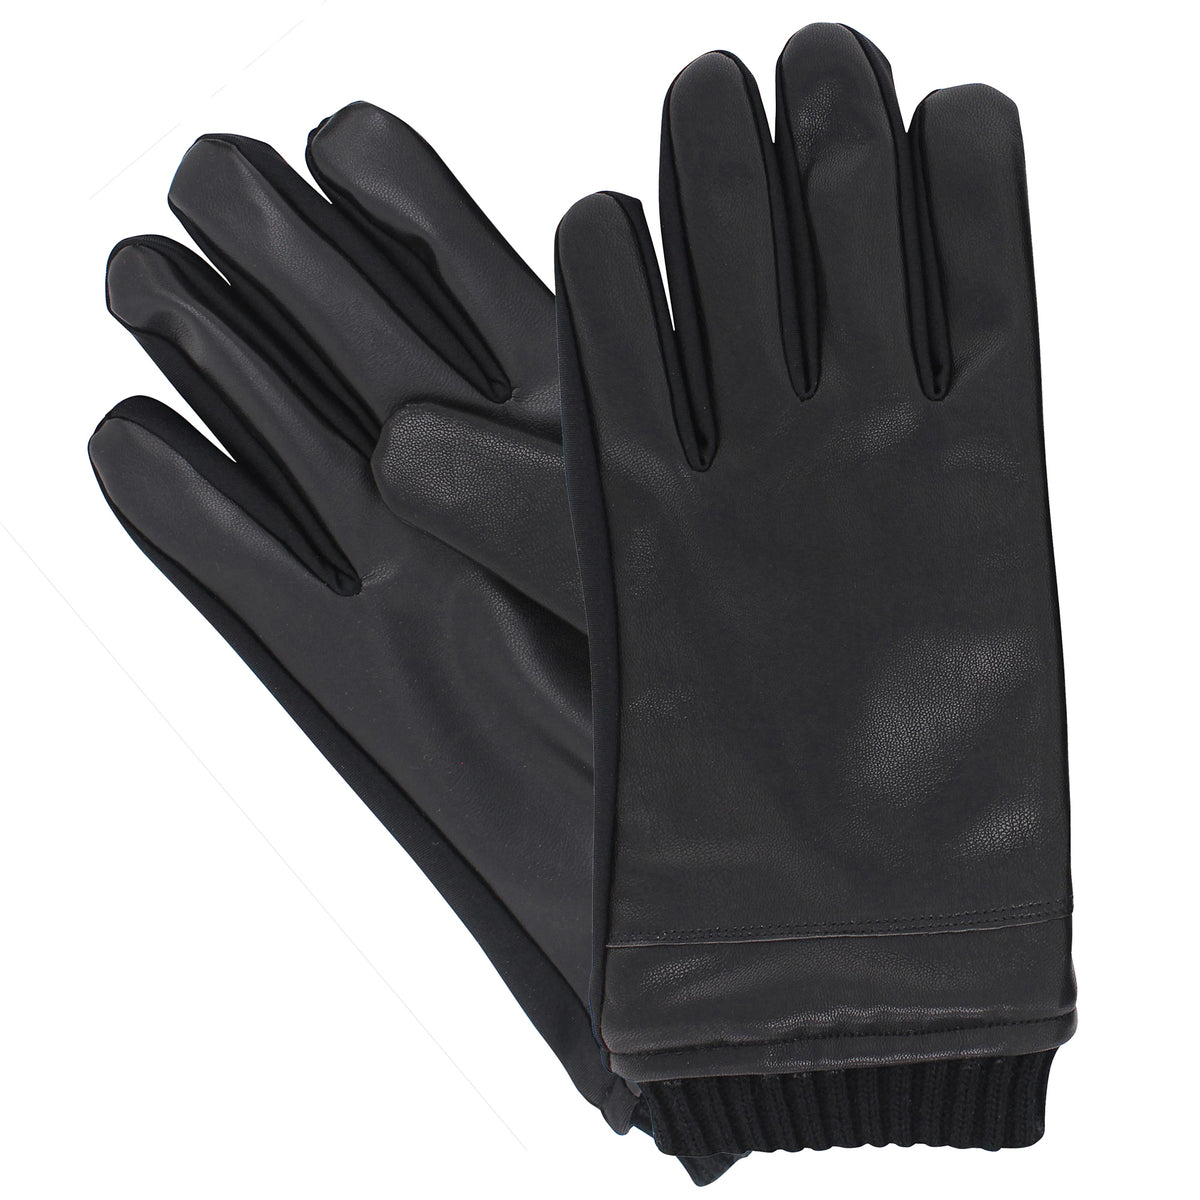 Isotoner Men's SLEEKHEAT™ Faux Nappa Glove with Ribbed Knit Cuff and smarTouch®